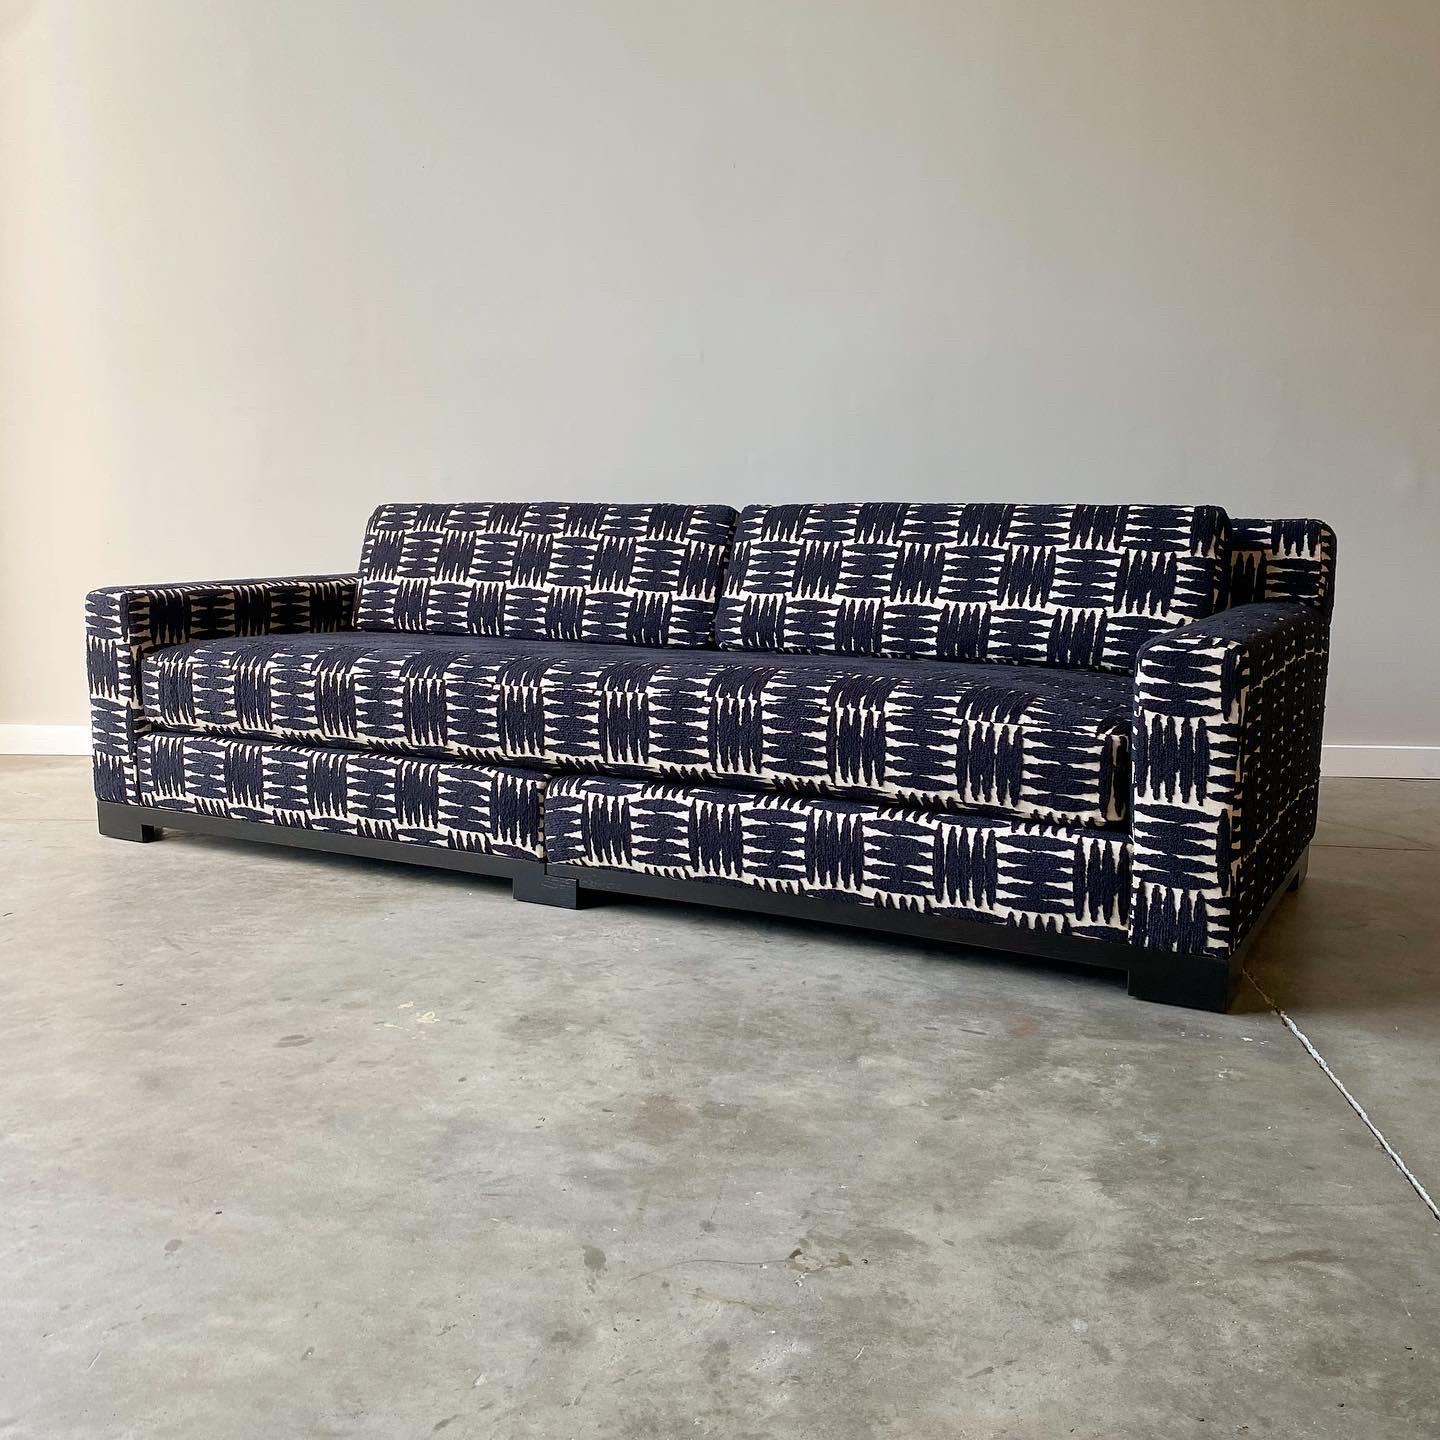 A simple and stunning design by Christian Liaigre produced by Holly Hunt.  This two piece sofa is very deep and comfortable and is newly upholstered in a striking textured abstract cotton fabric.

measures 101” long, 42” deep, 30” high

19” seat